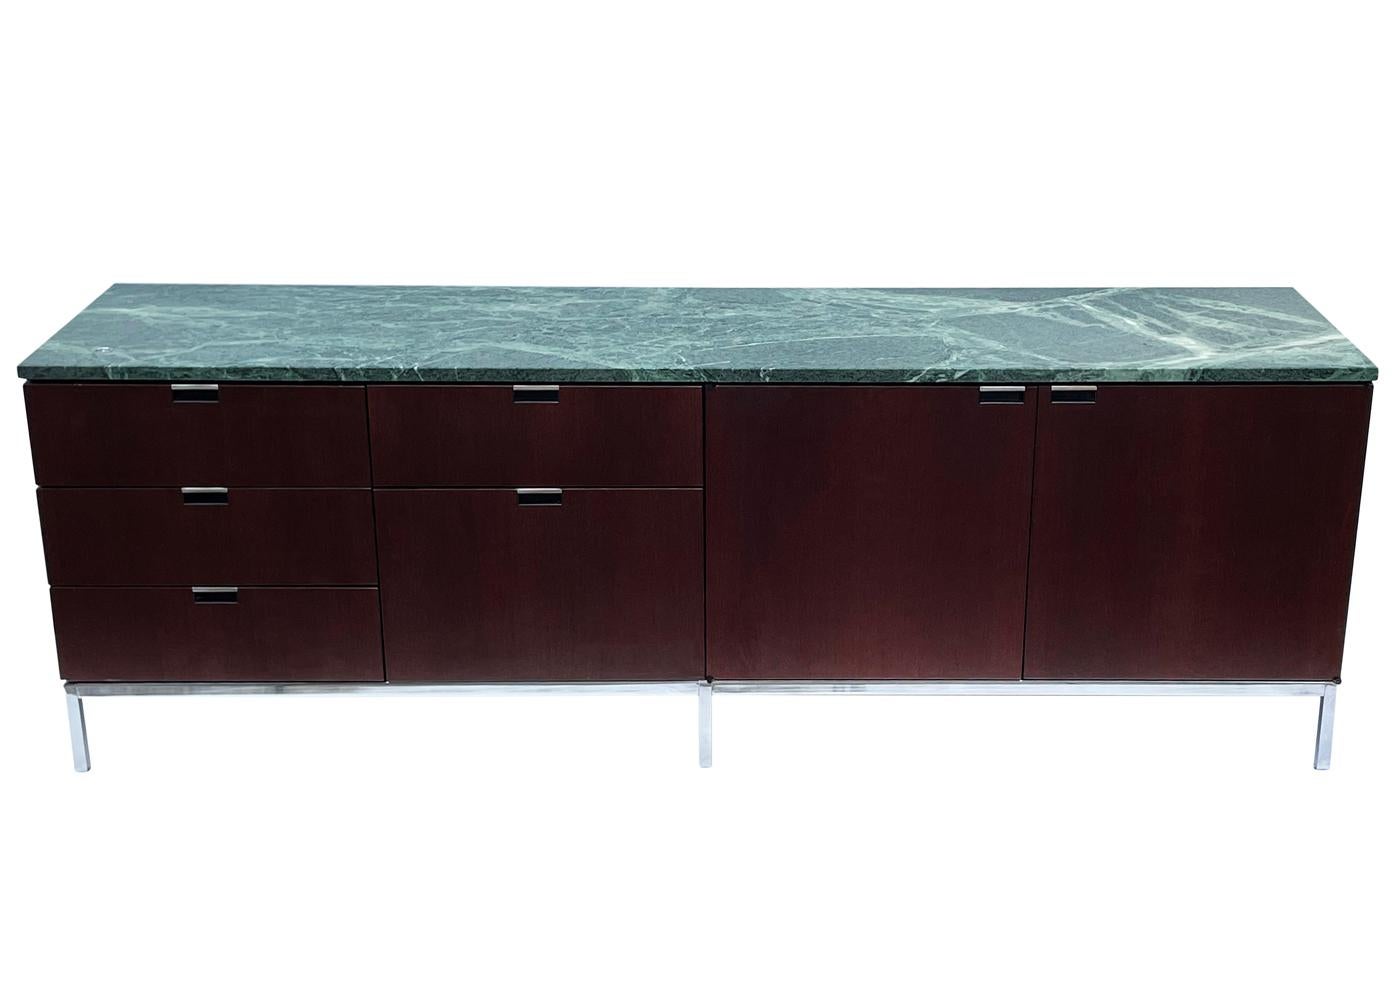 A sleek modern classic cabinet designed by Florence Knoll and produced by Knoll. It features a dark mahogany case, stainless steel legs and a green marble top. We currently have two matching credenzas in stock and they're priced each.